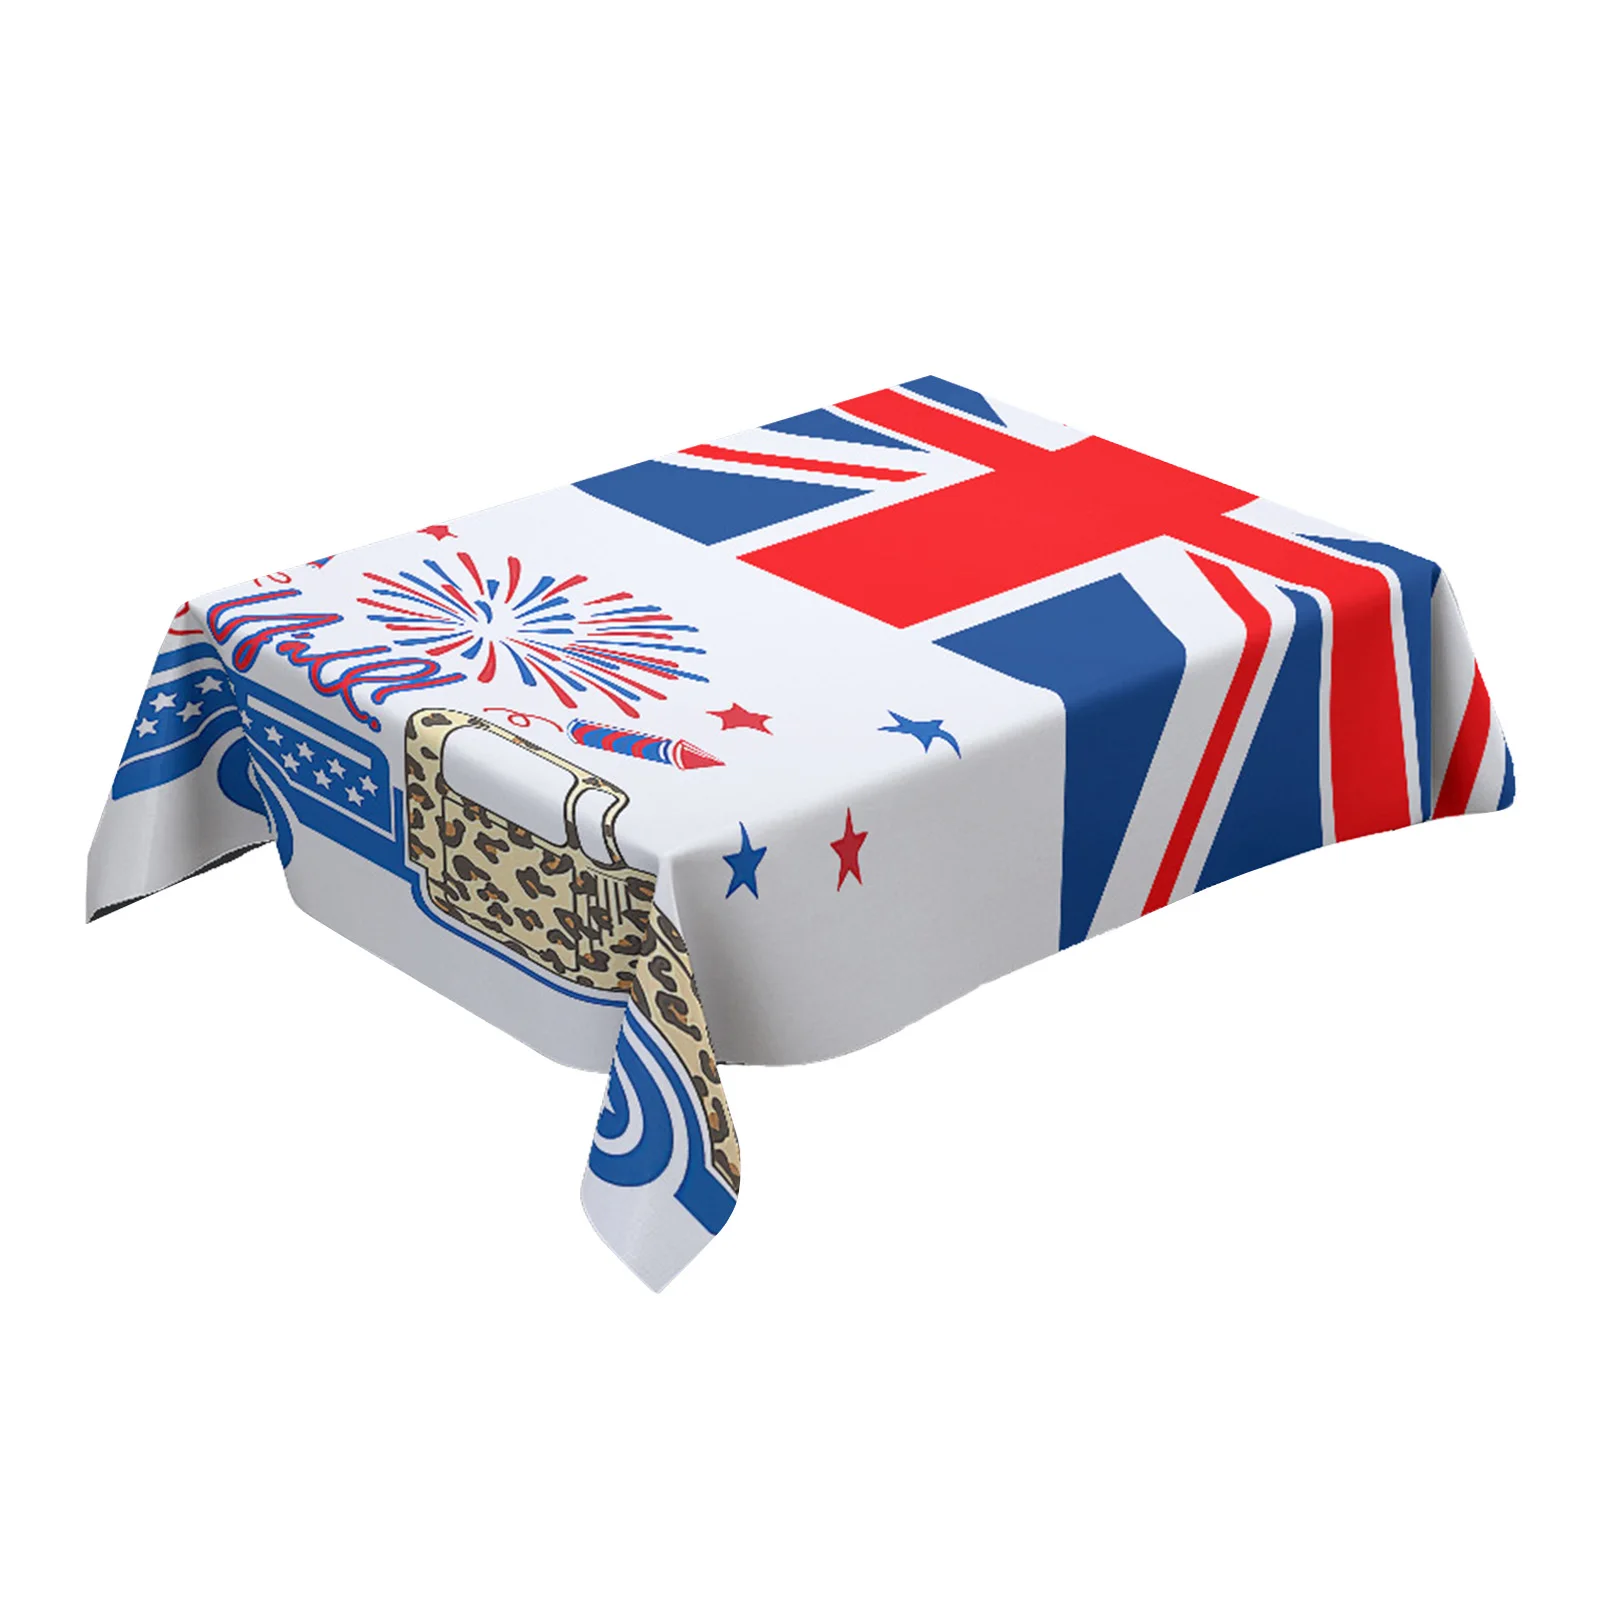 

Union Jack Tablecloth Britain Tablecloth UK Table Covers Queen's Jubilee Patriotic Decoration 2022 Jubilee Celebration Party